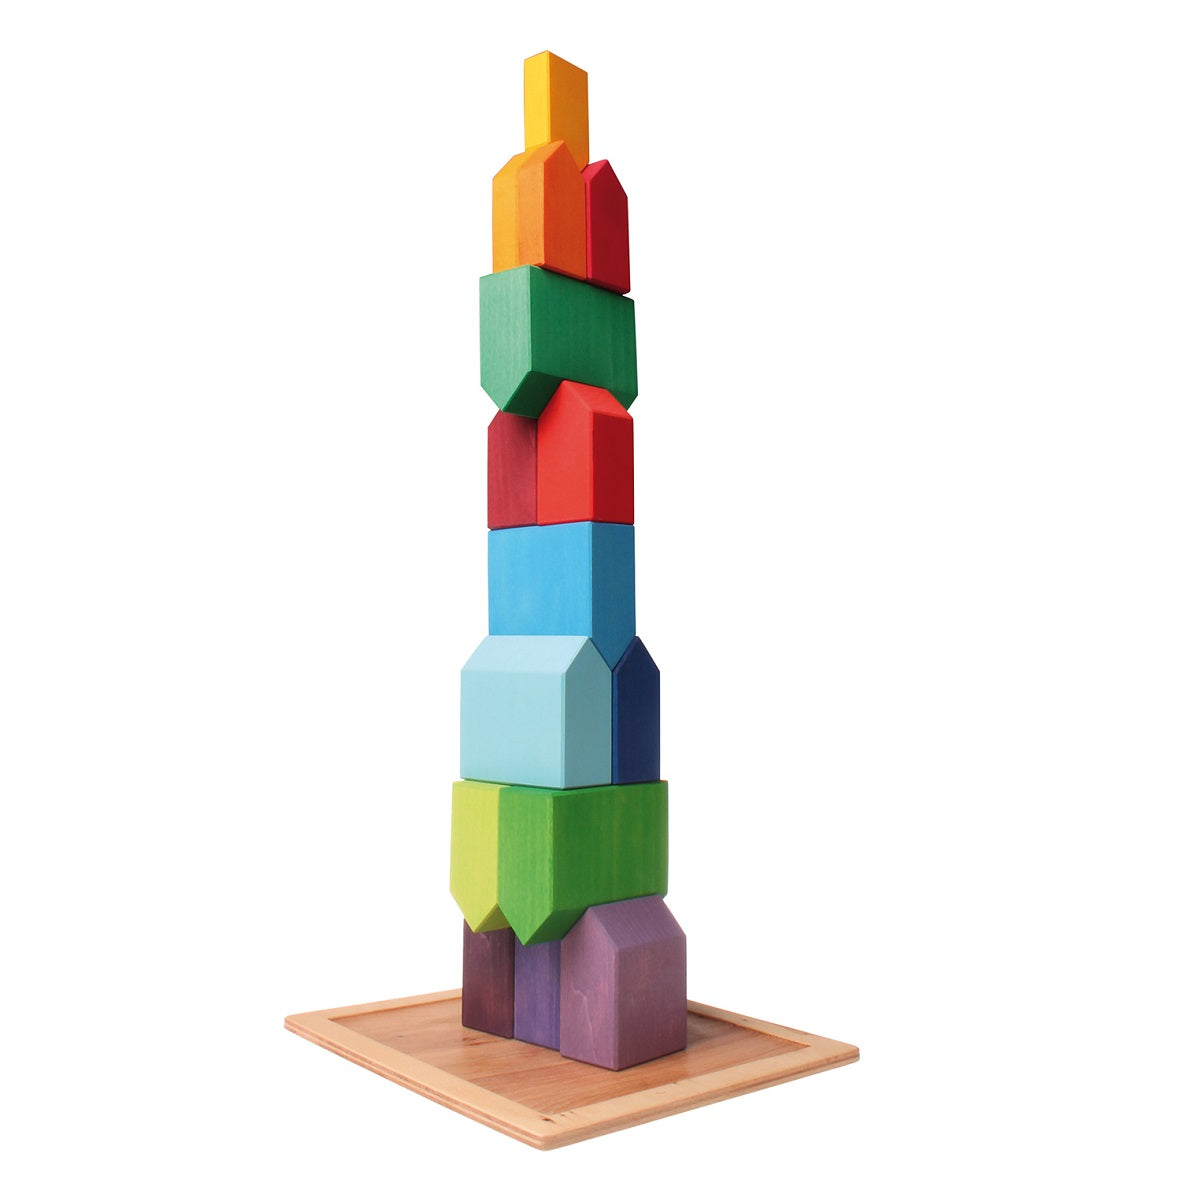 on a white background, a natural wooden square tray, with multi coloured houses stacked on top of each other into a tall tower.